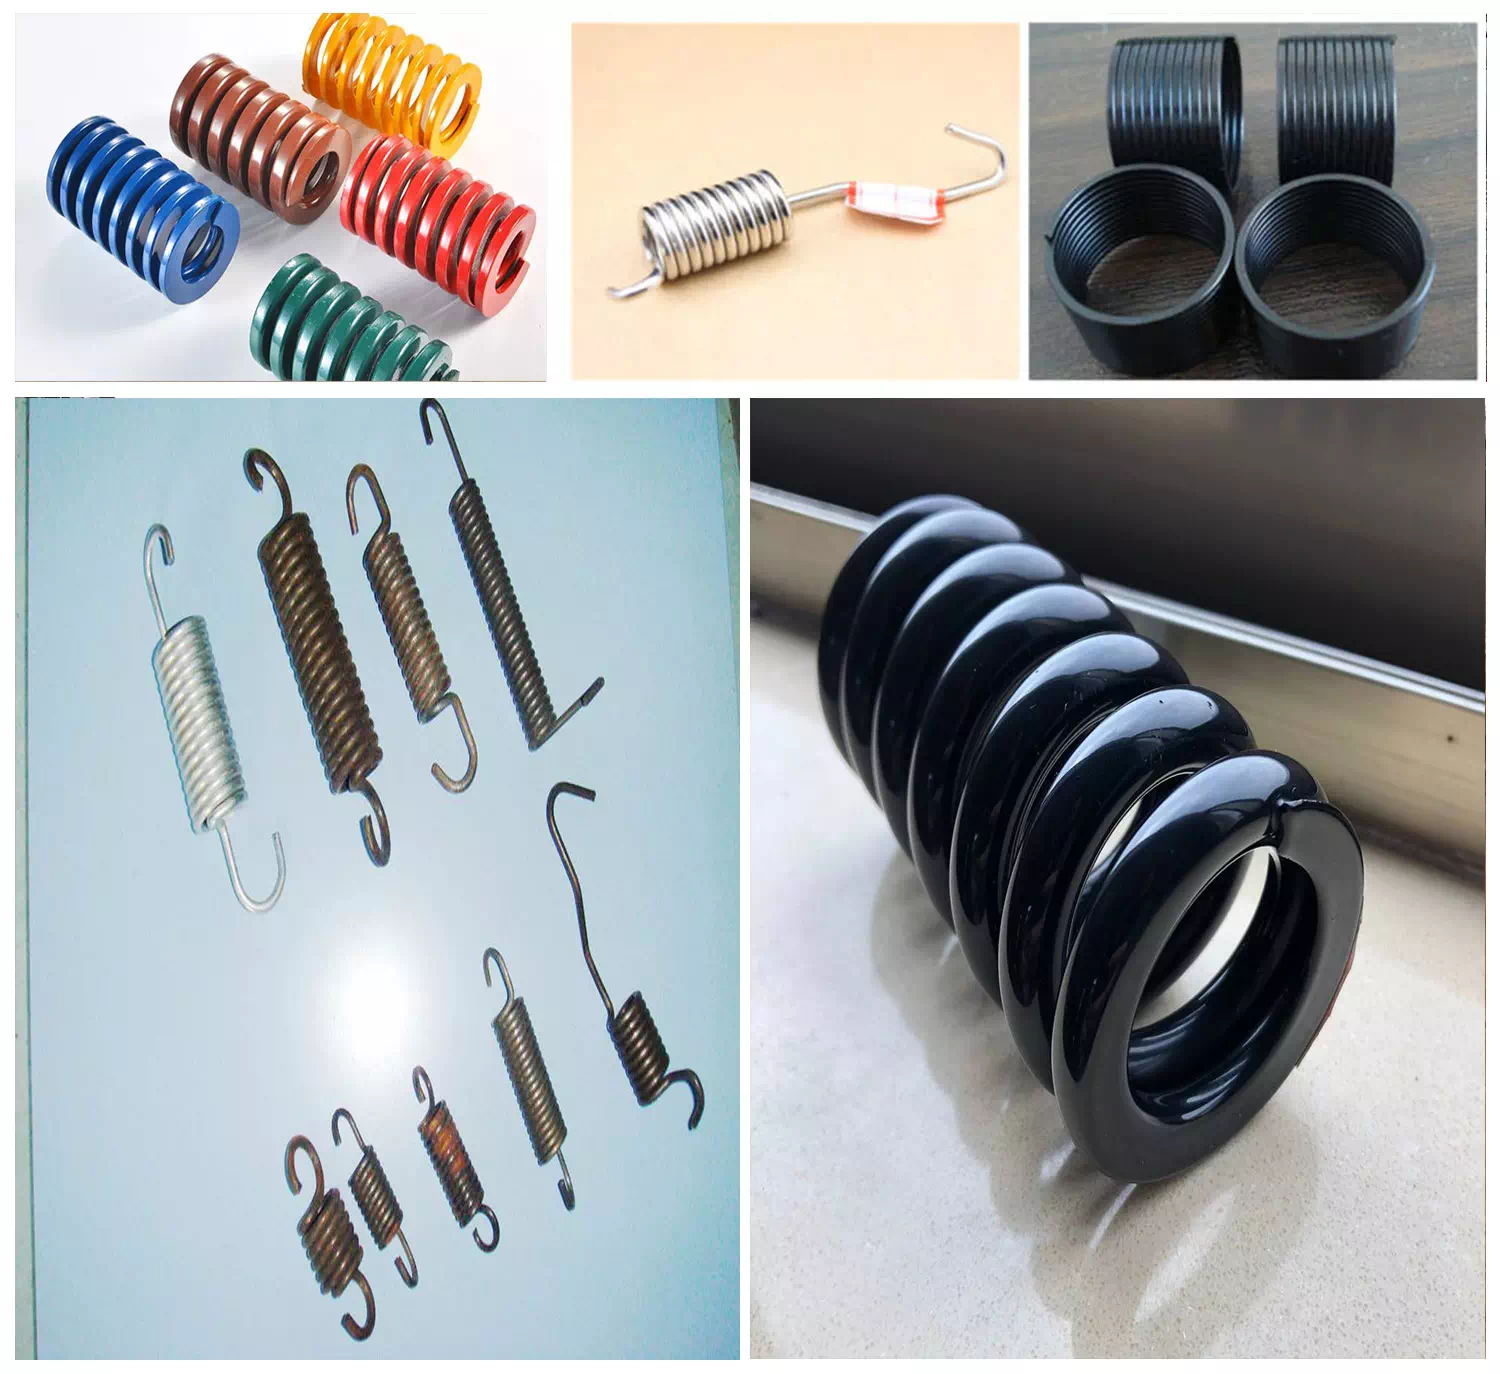 What metals can coil springs be made of